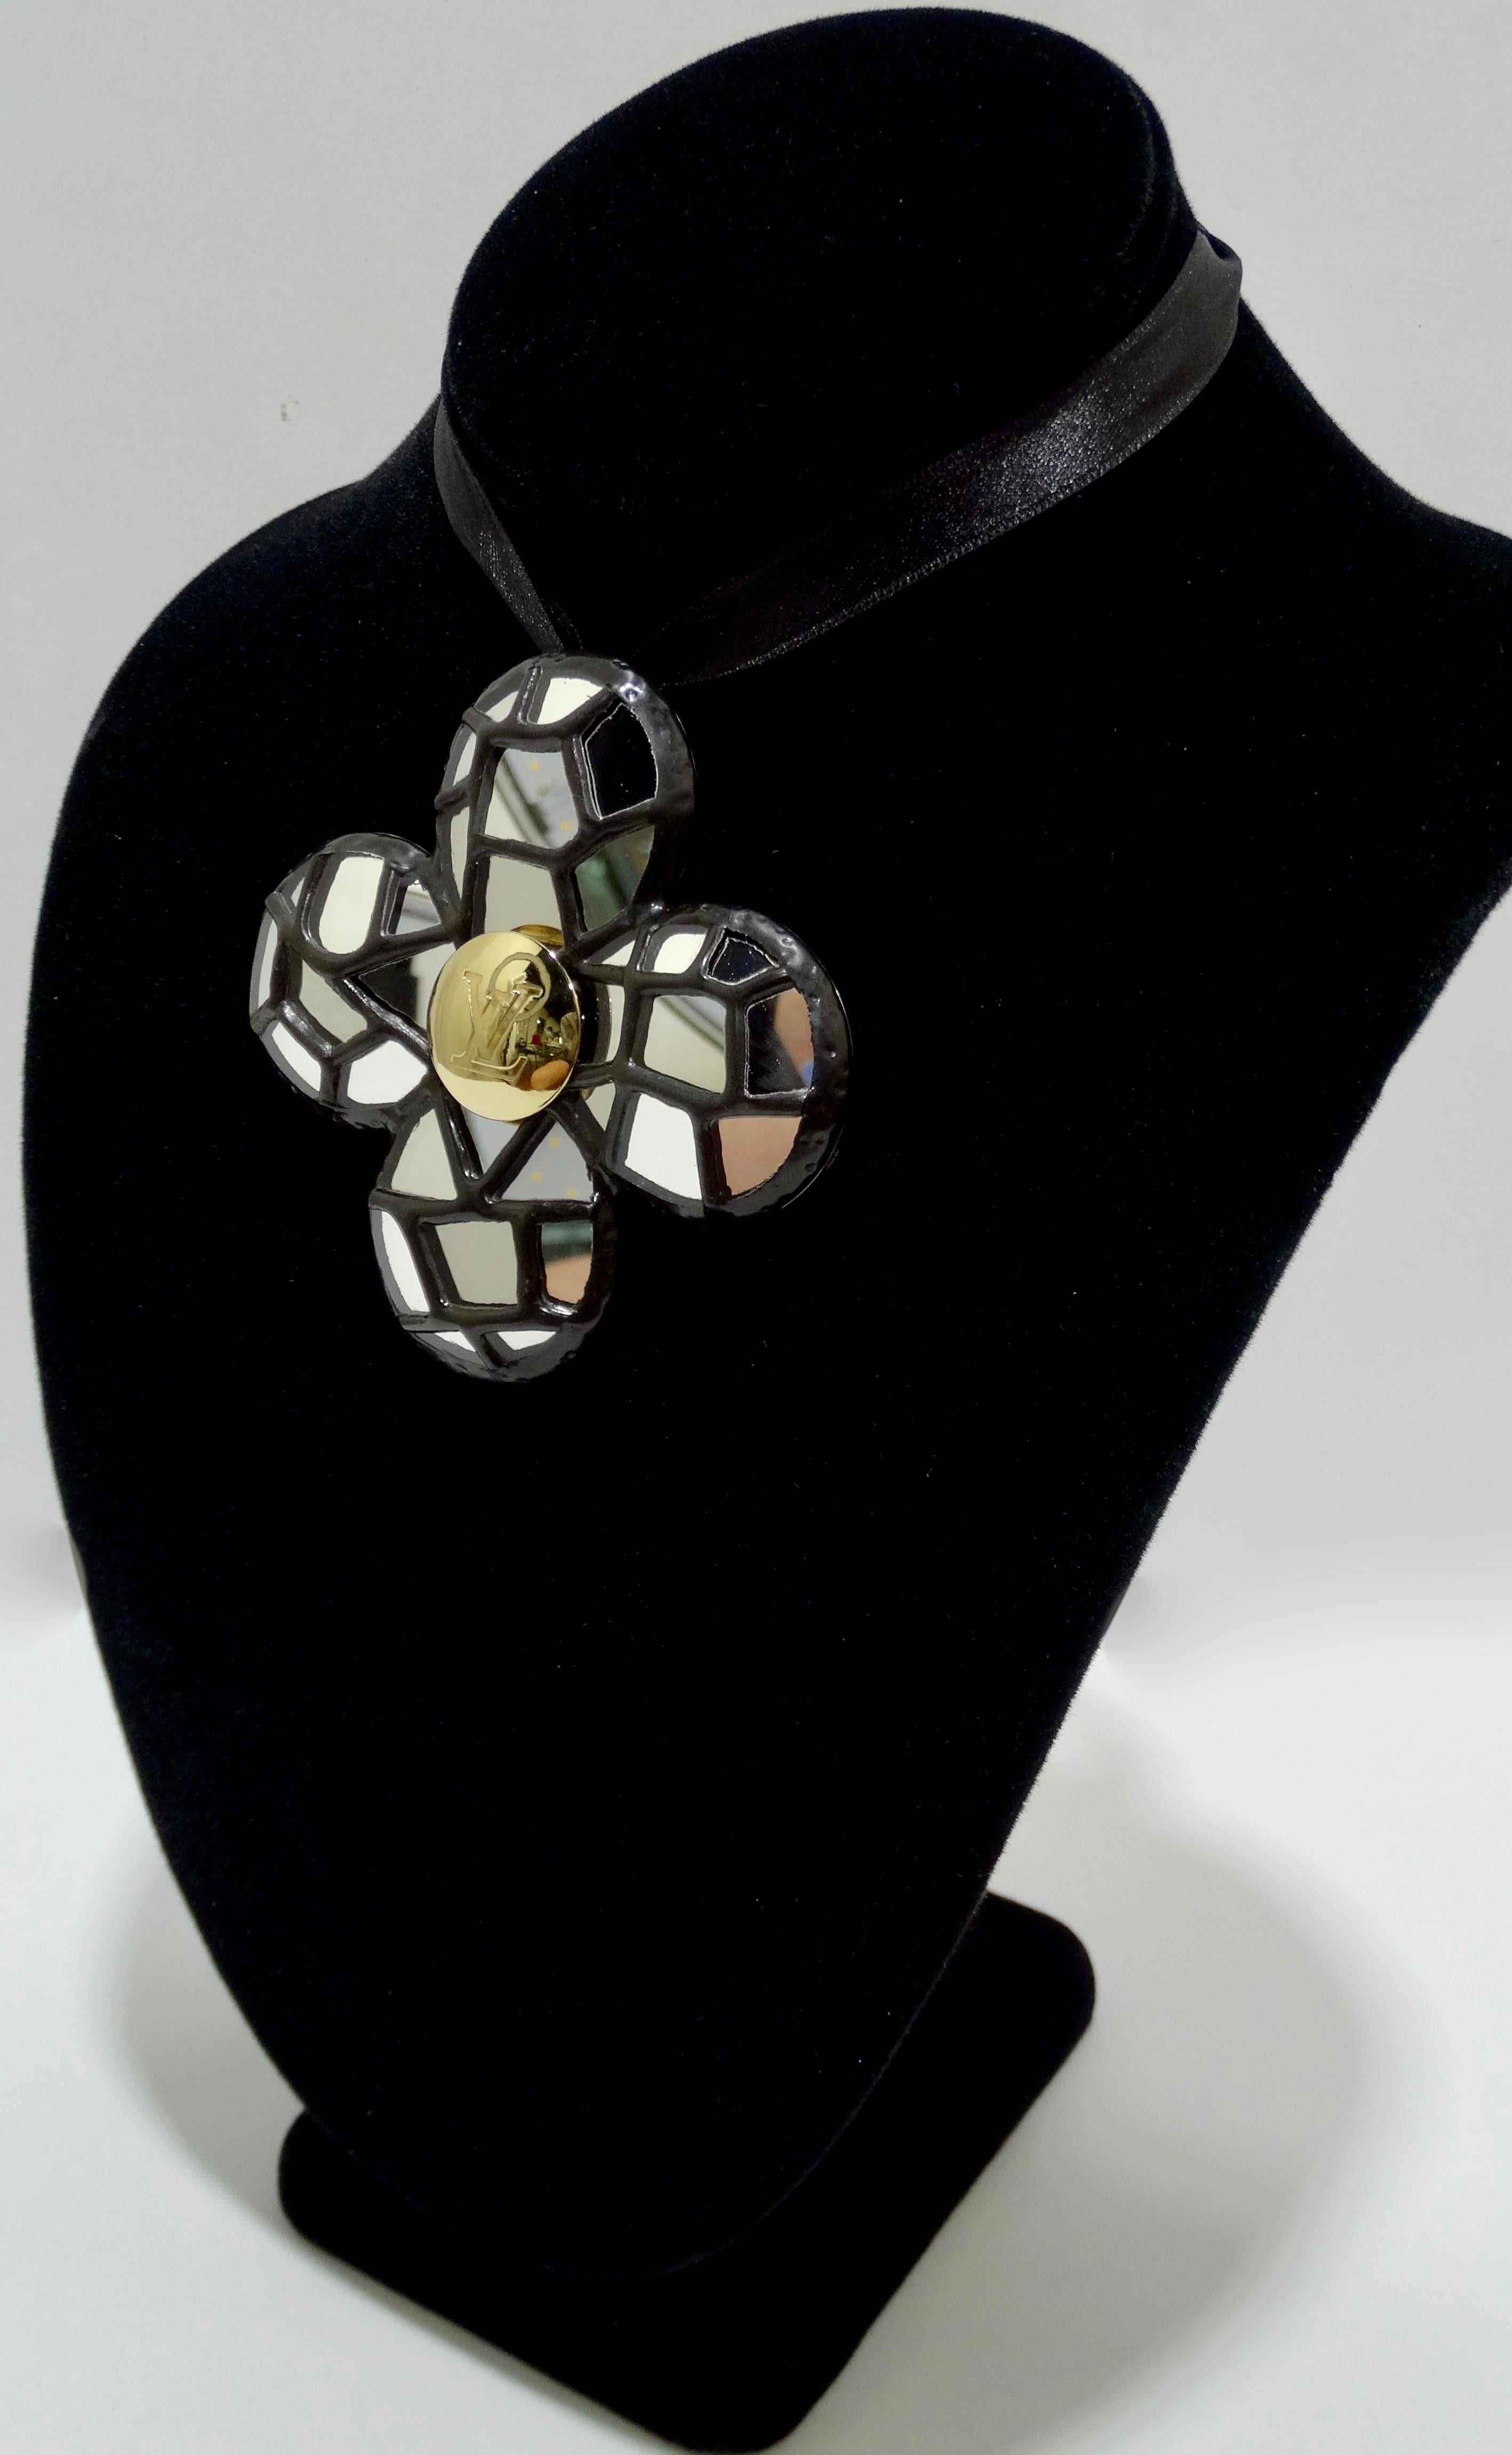 Elevate your whole look with this amazing Louis Vuitton brooch/pendant! Circa 21st Century, this steel quatrefoil brooch/pendant features a mirrored mosaic front with a gold plated LV stamped emblem in the center. The back includes a brooch closure